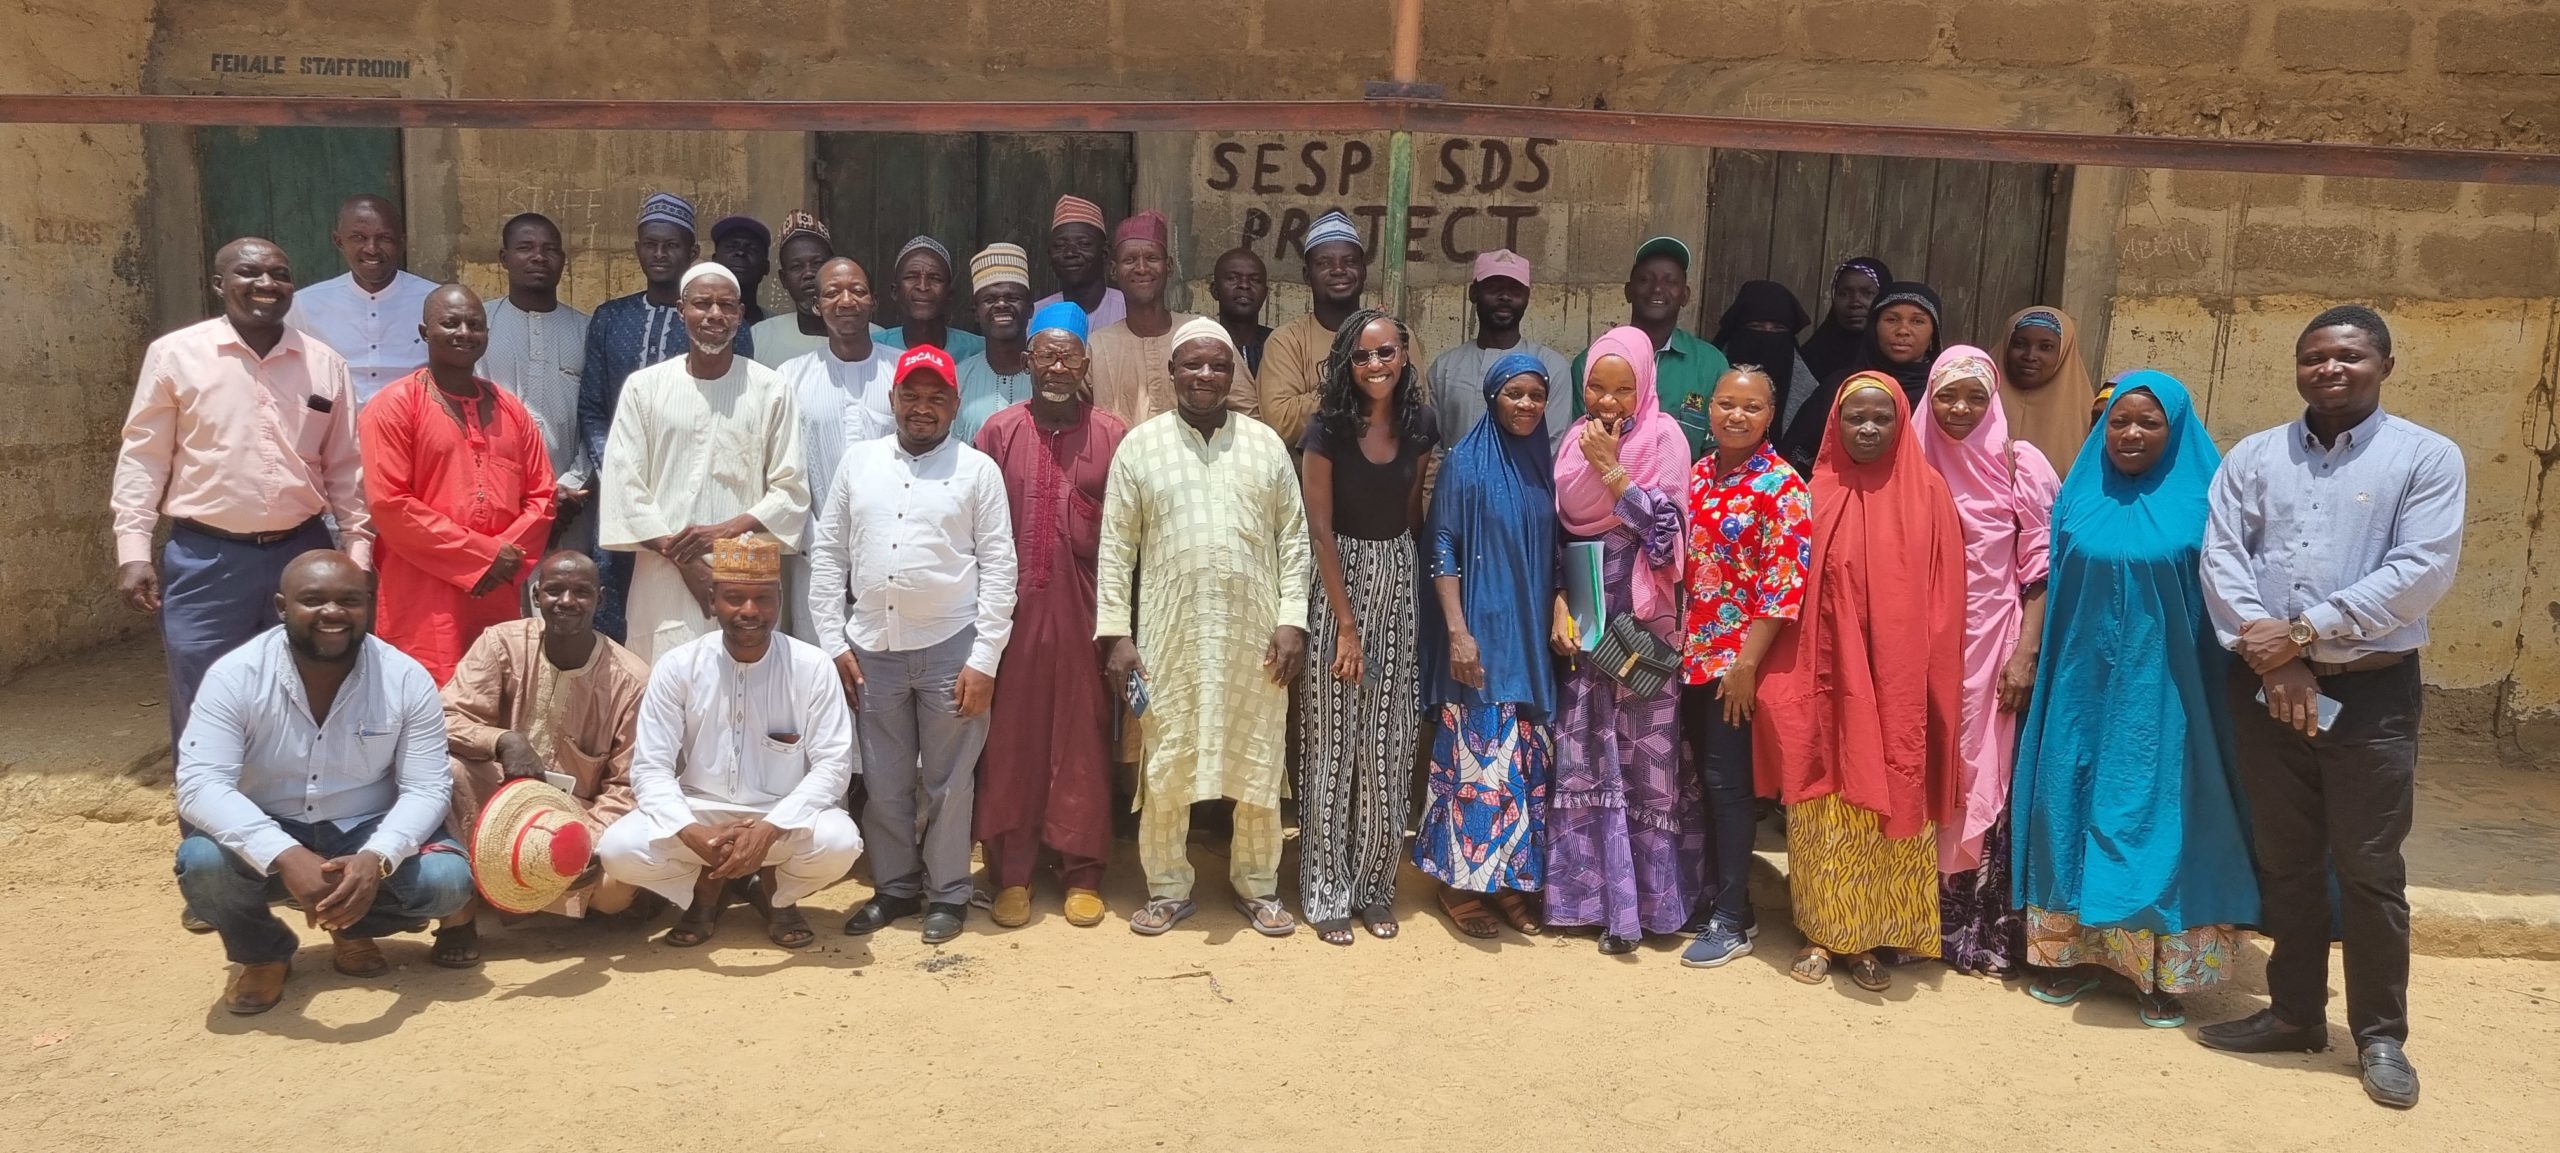 Tegemeo group poses with 2SCALE staff and partners during their visit